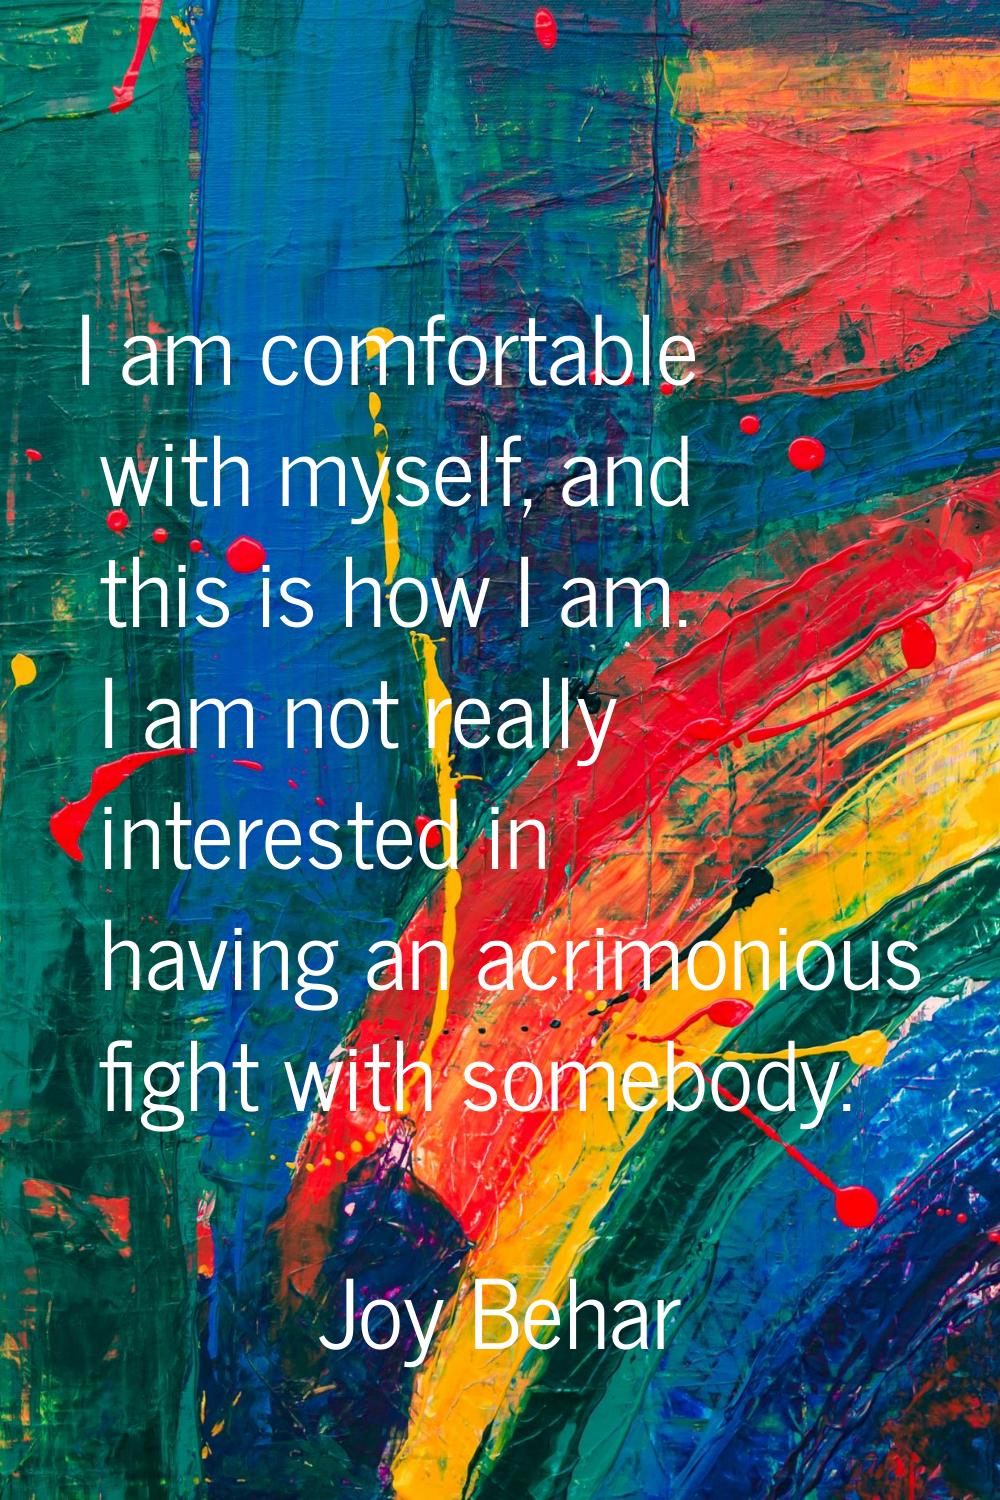 I am comfortable with myself, and this is how I am. I am not really interested in having an acrimon